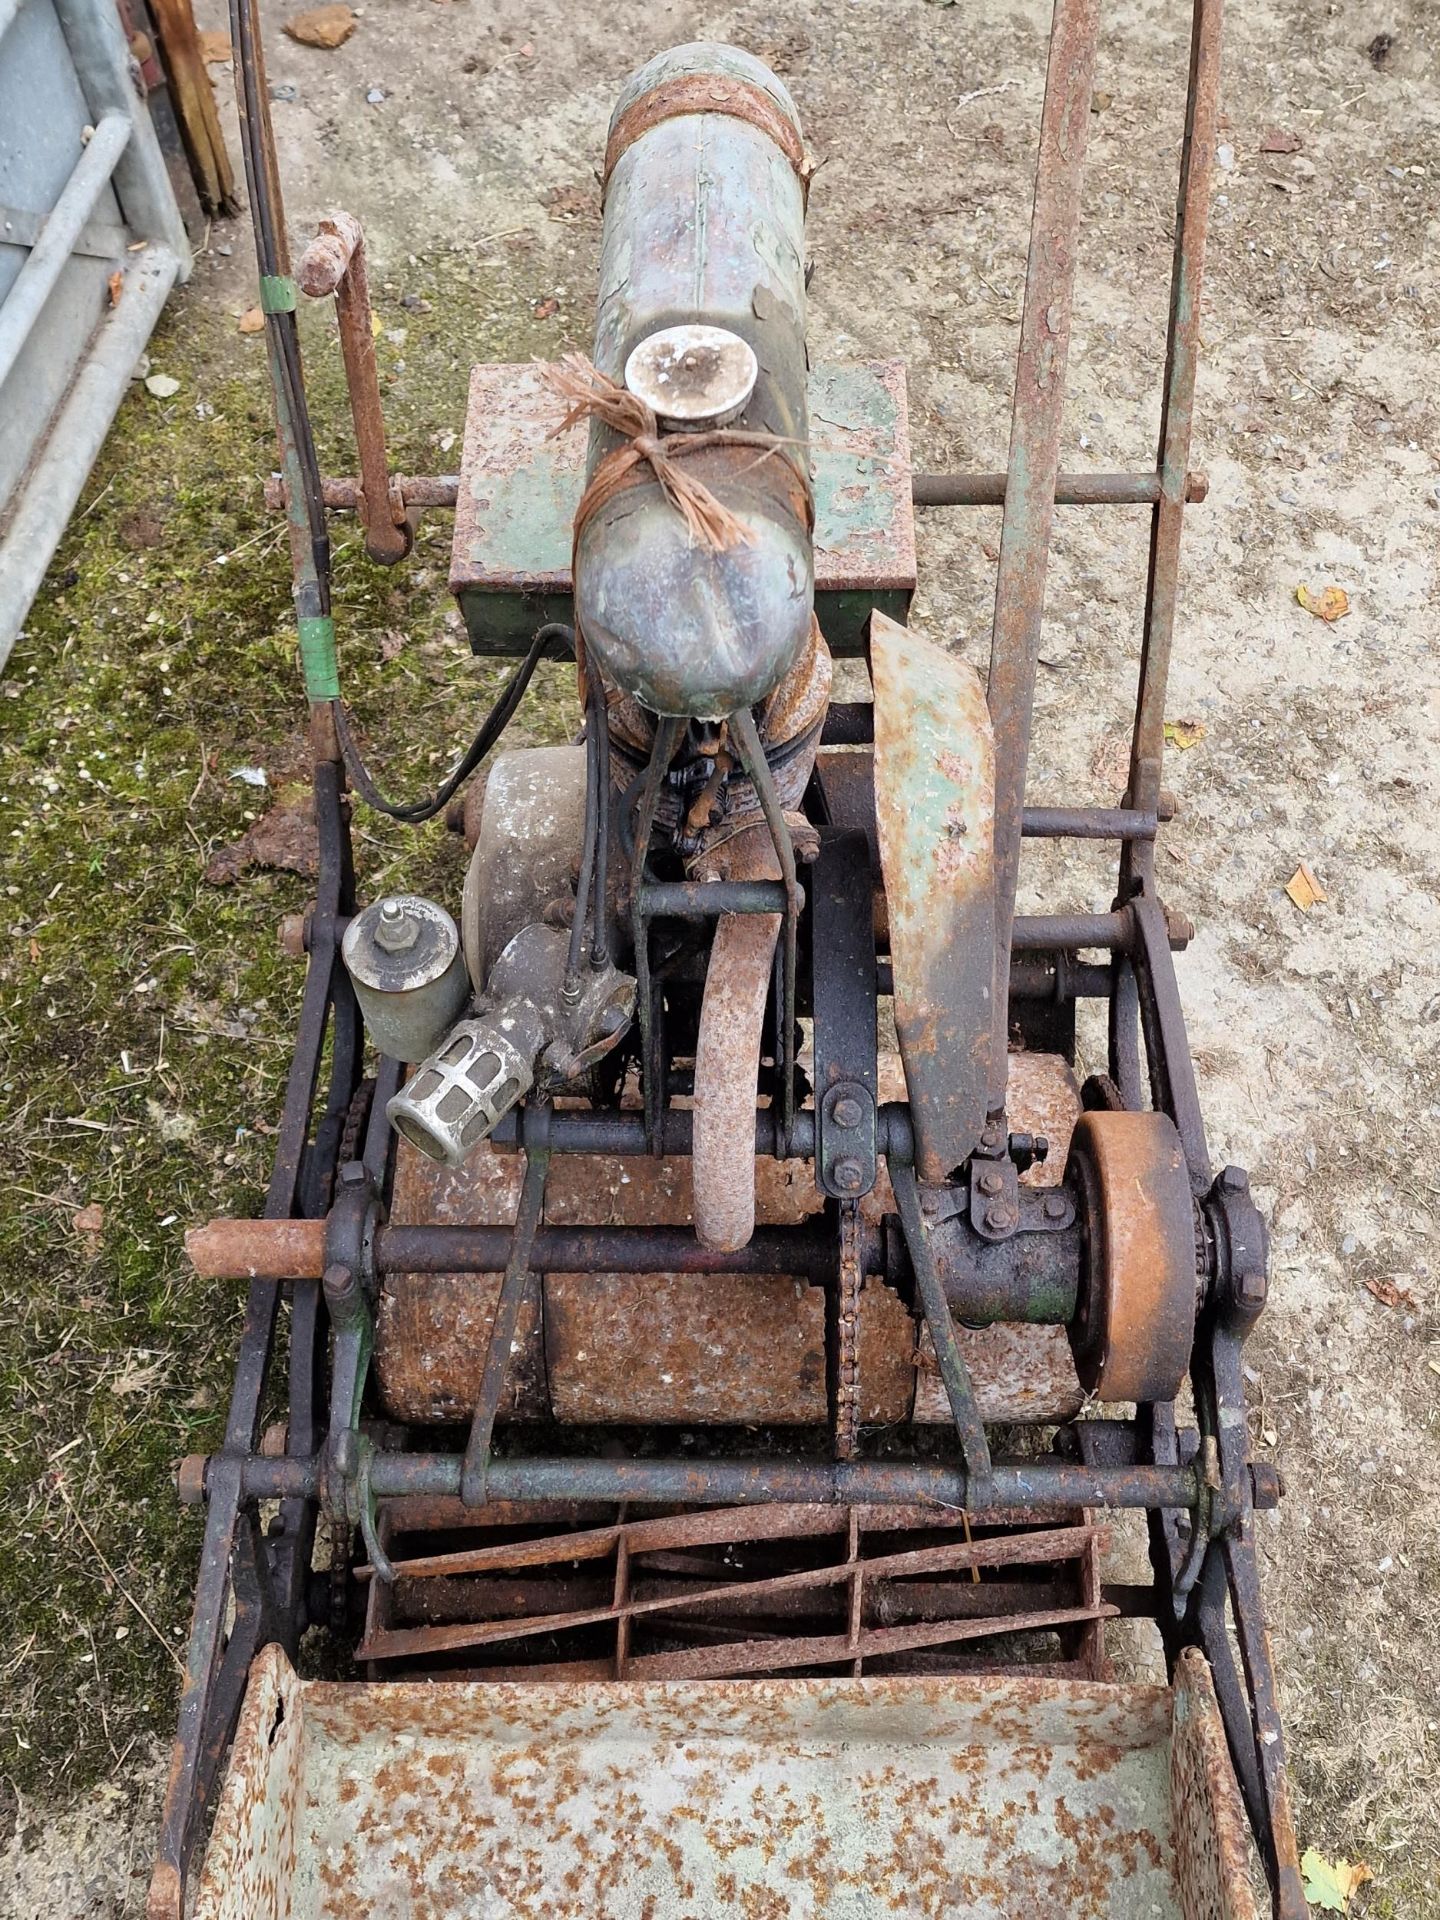 Vintage Atco lawnmower with collection bucket together with another vintage Atco mower, for - Image 2 of 4